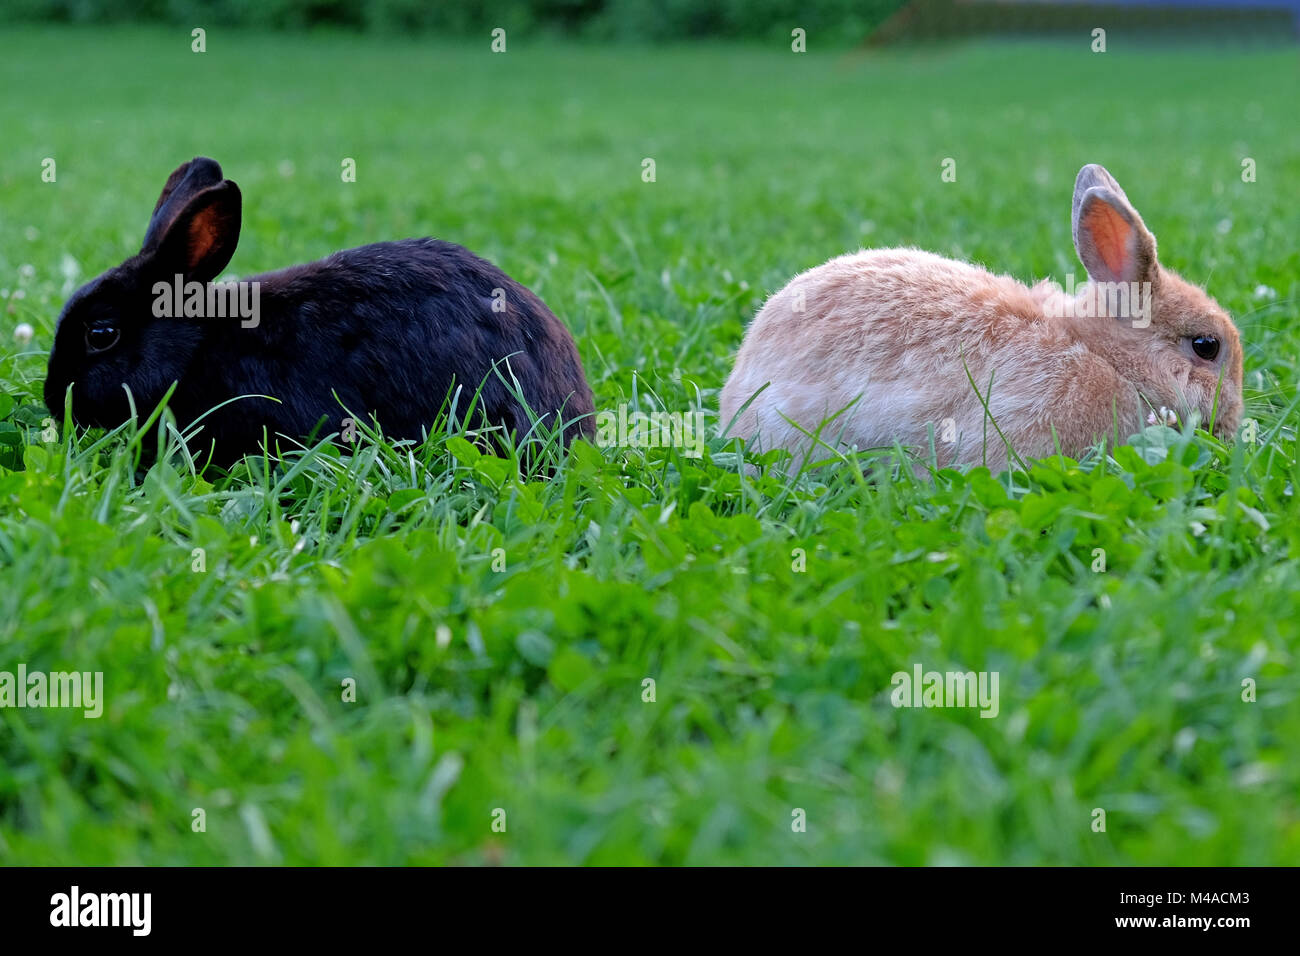 Two grazing rabbits, one black, one brown Stock Photo